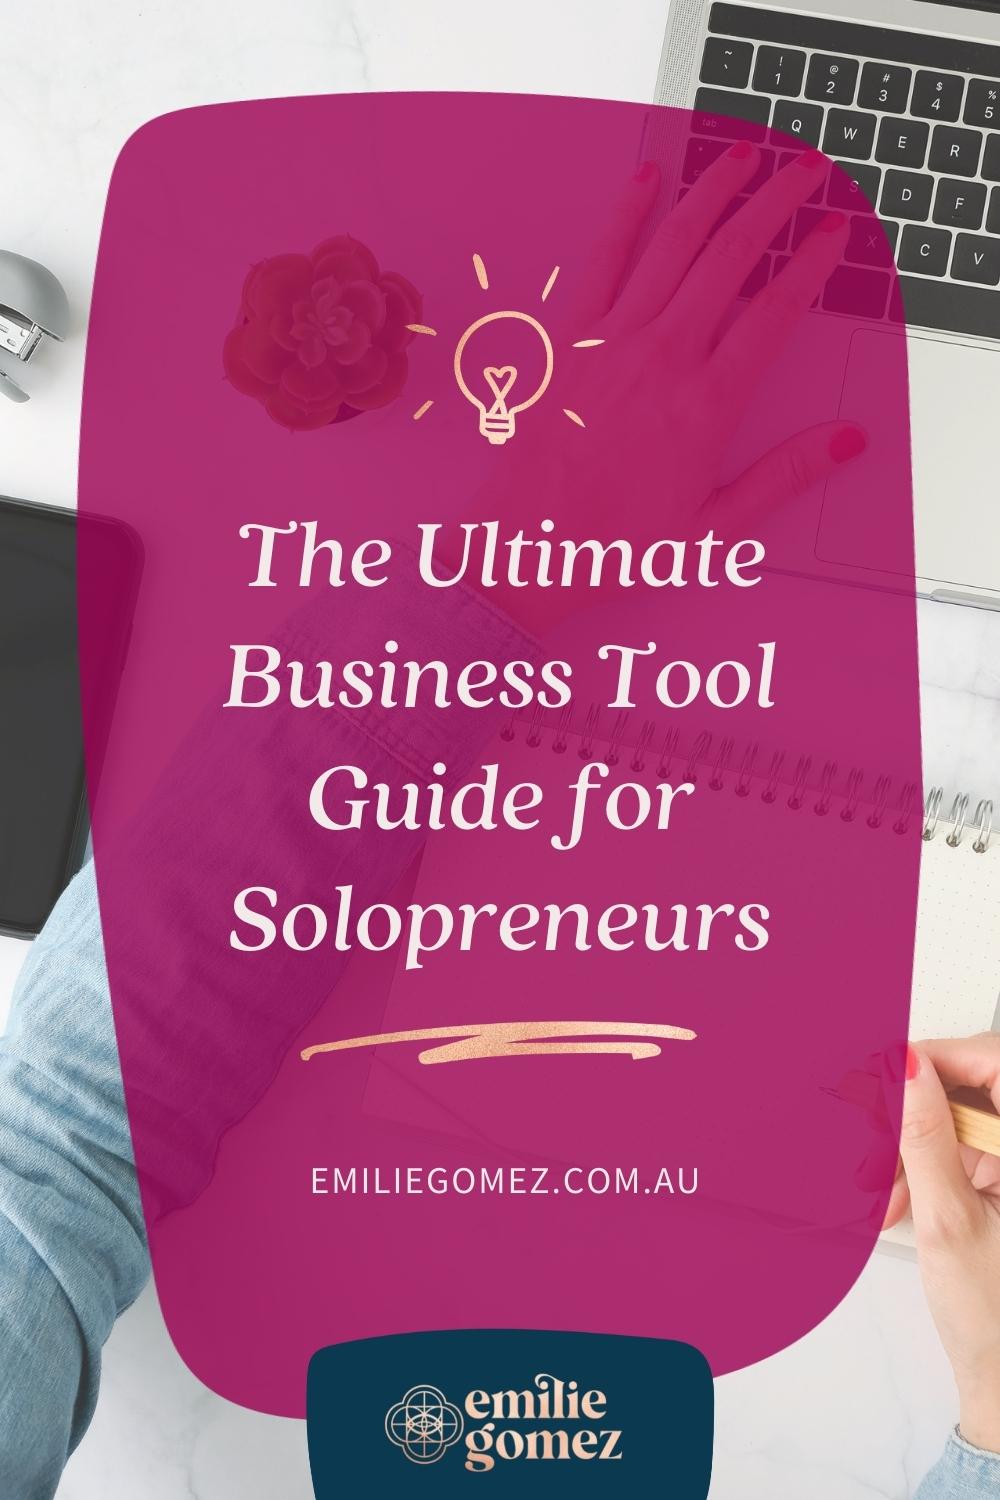 Choosing the right business tools as a solopreneur can be hard, there are so many different systems, programs and apps out there it’s easy to get overwhelmed or end up picking the most popular tool out there. That could very well lead you to choose the wrong tool for you and your business so I’ve created this ultimate guide to help solopreneurs choose the right tool for your business. Click through to get started!